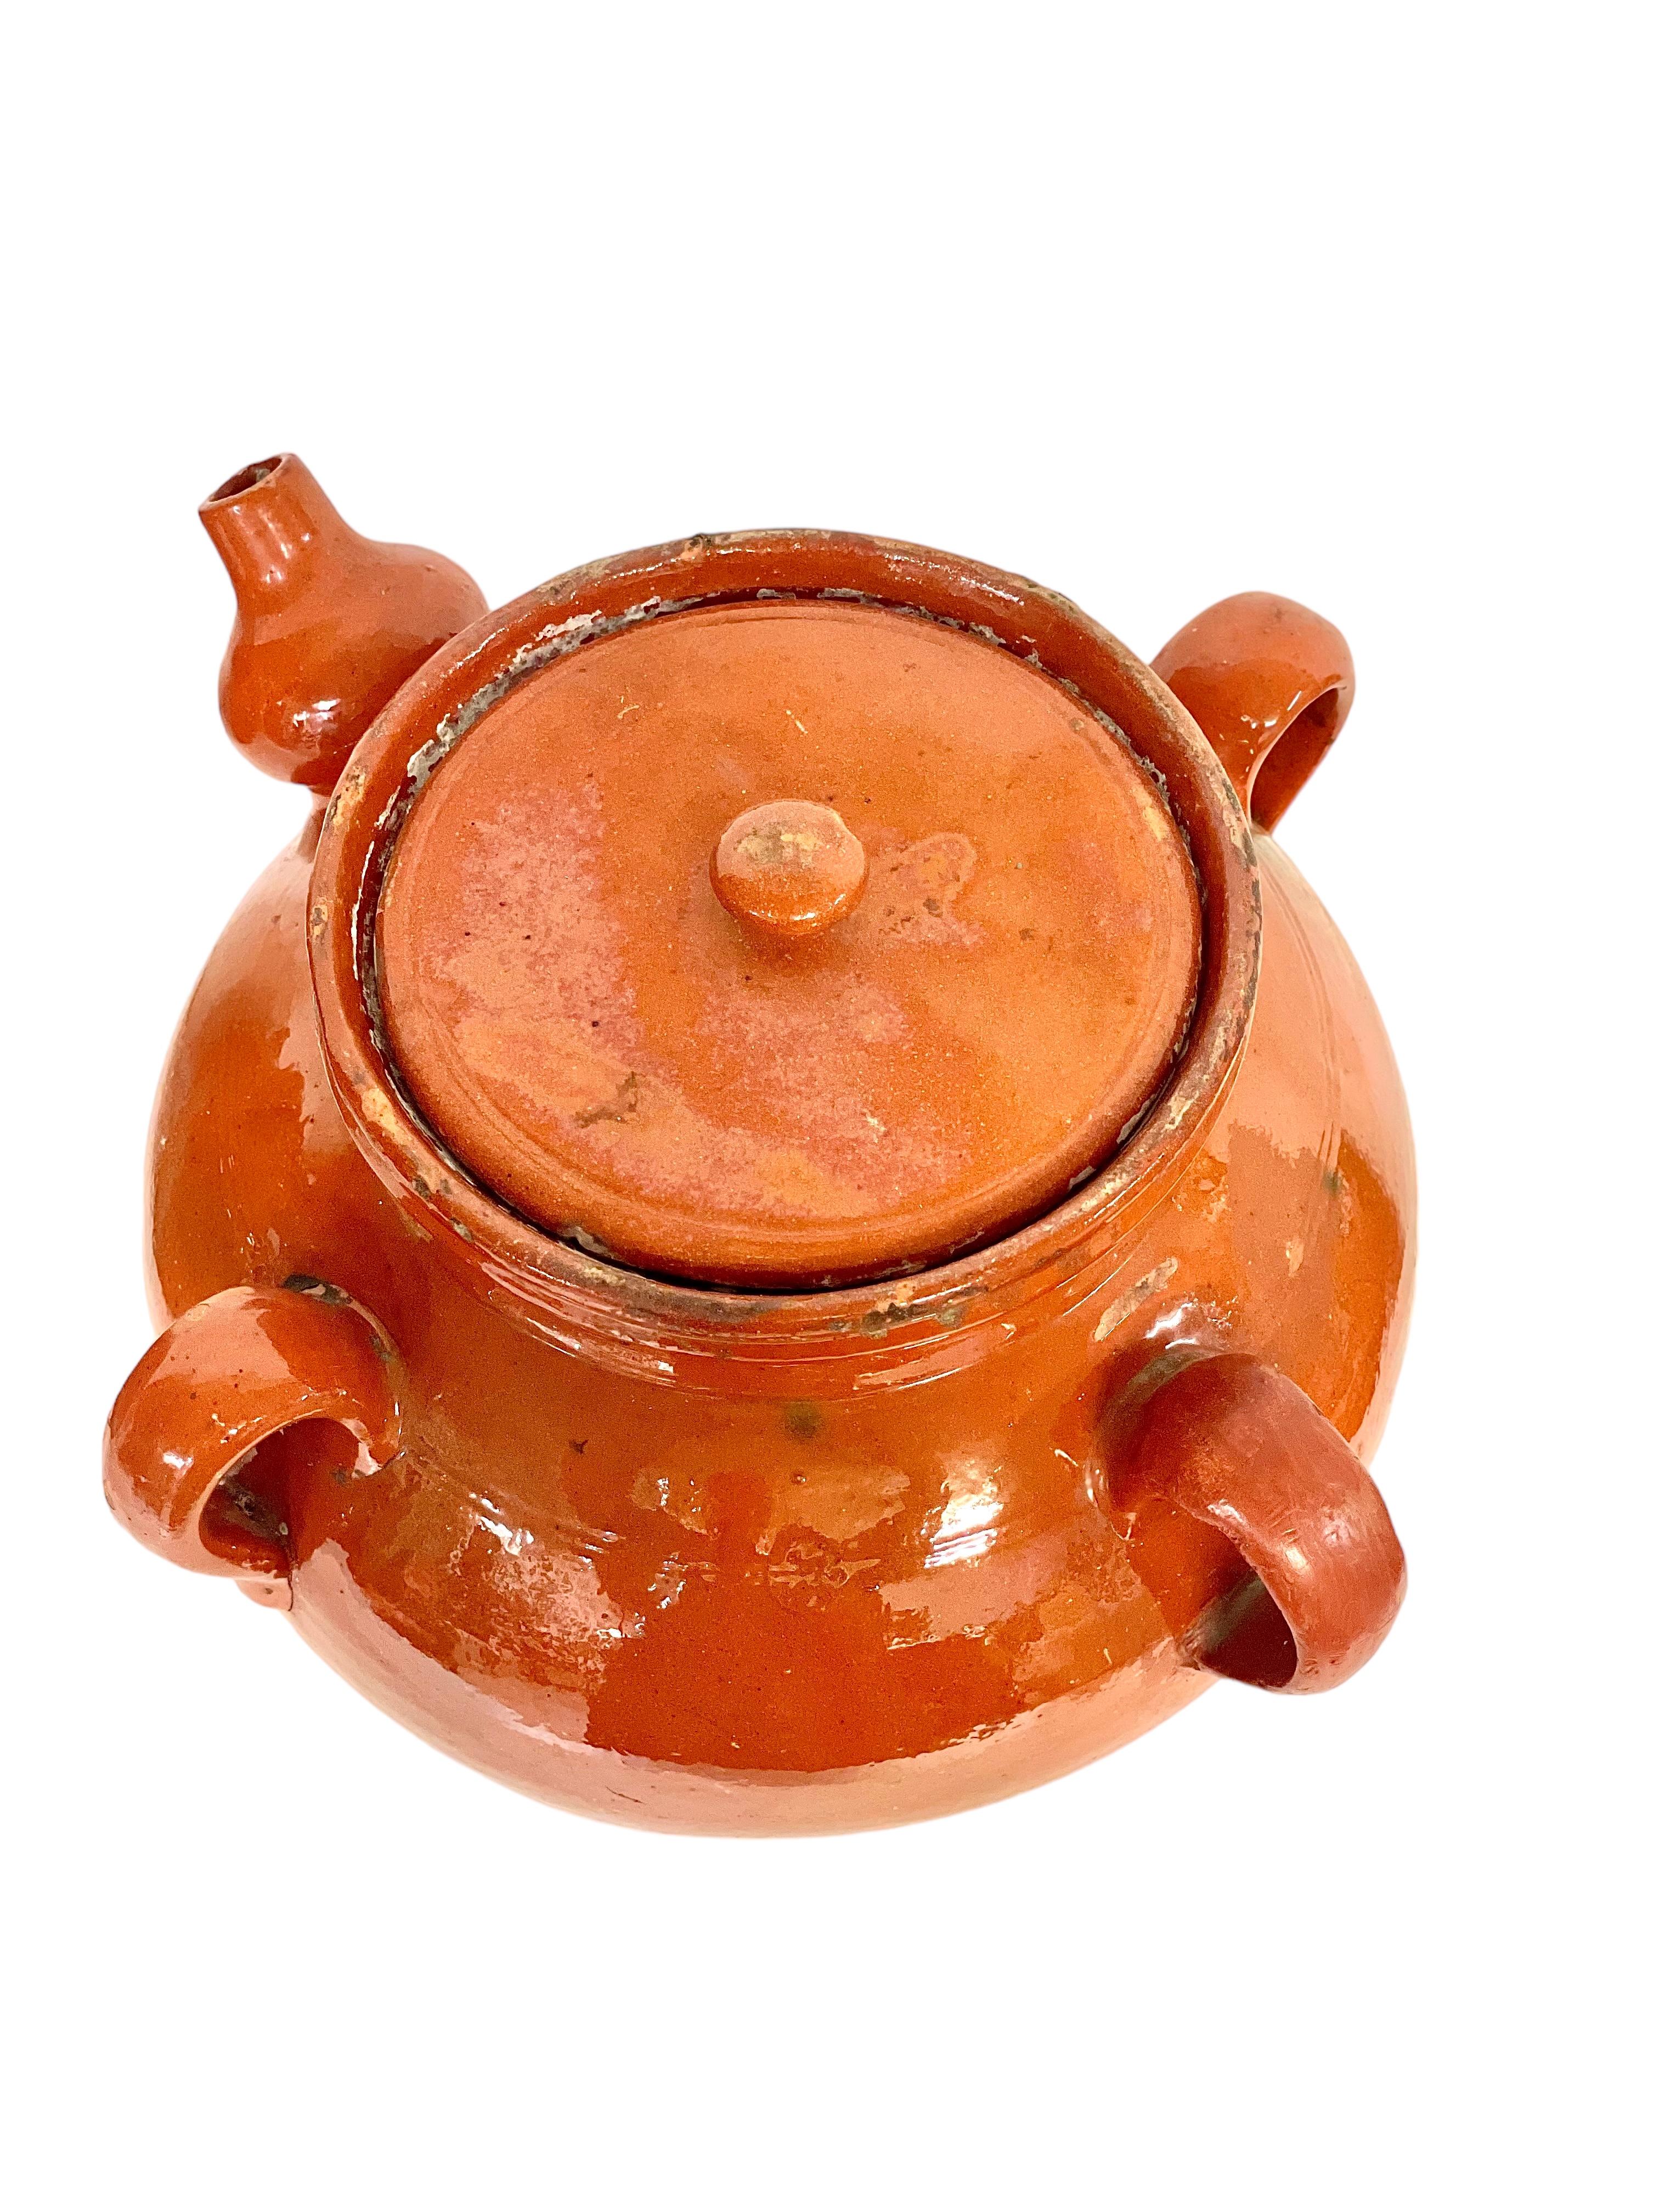 19th C. Large Terracotta Walnut Oil Jar with its Lid For Sale 8